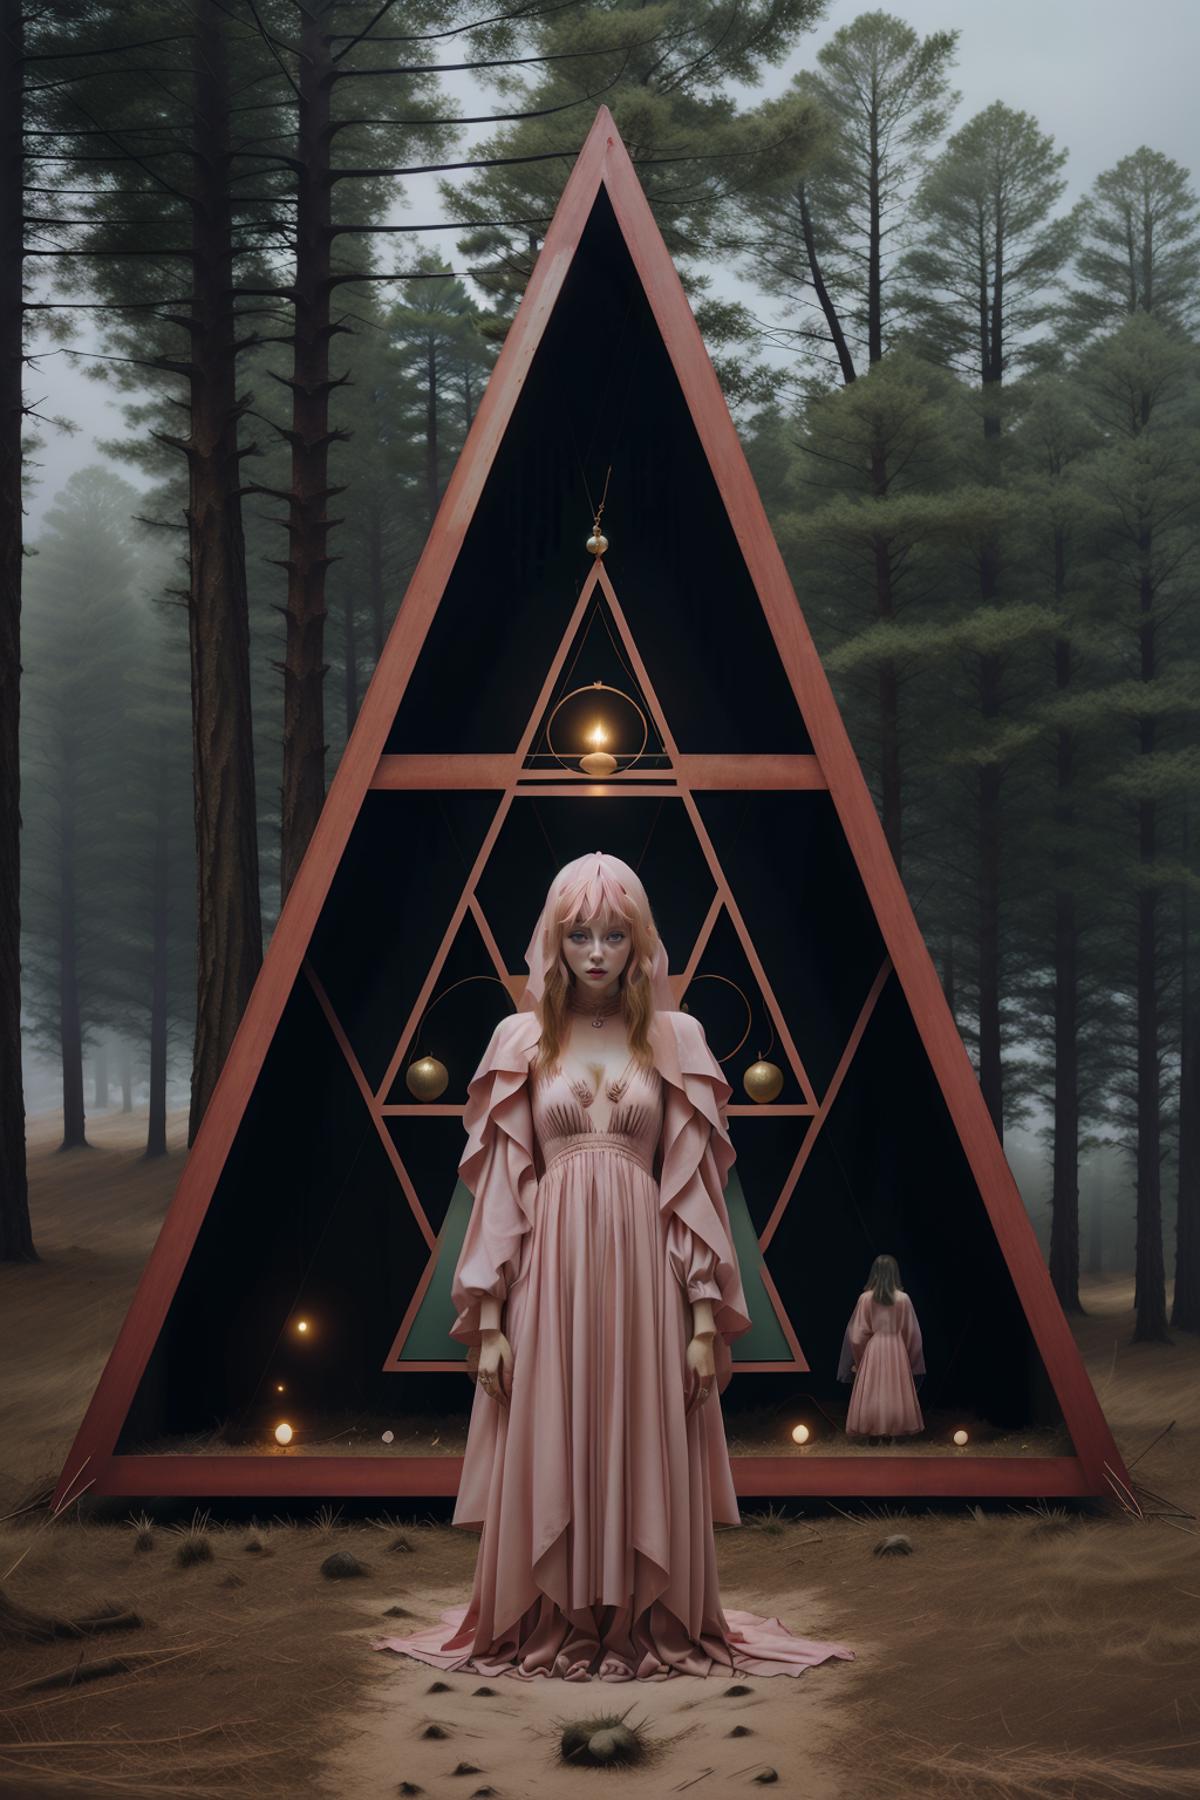 Occult Geometry image by PromptGeek